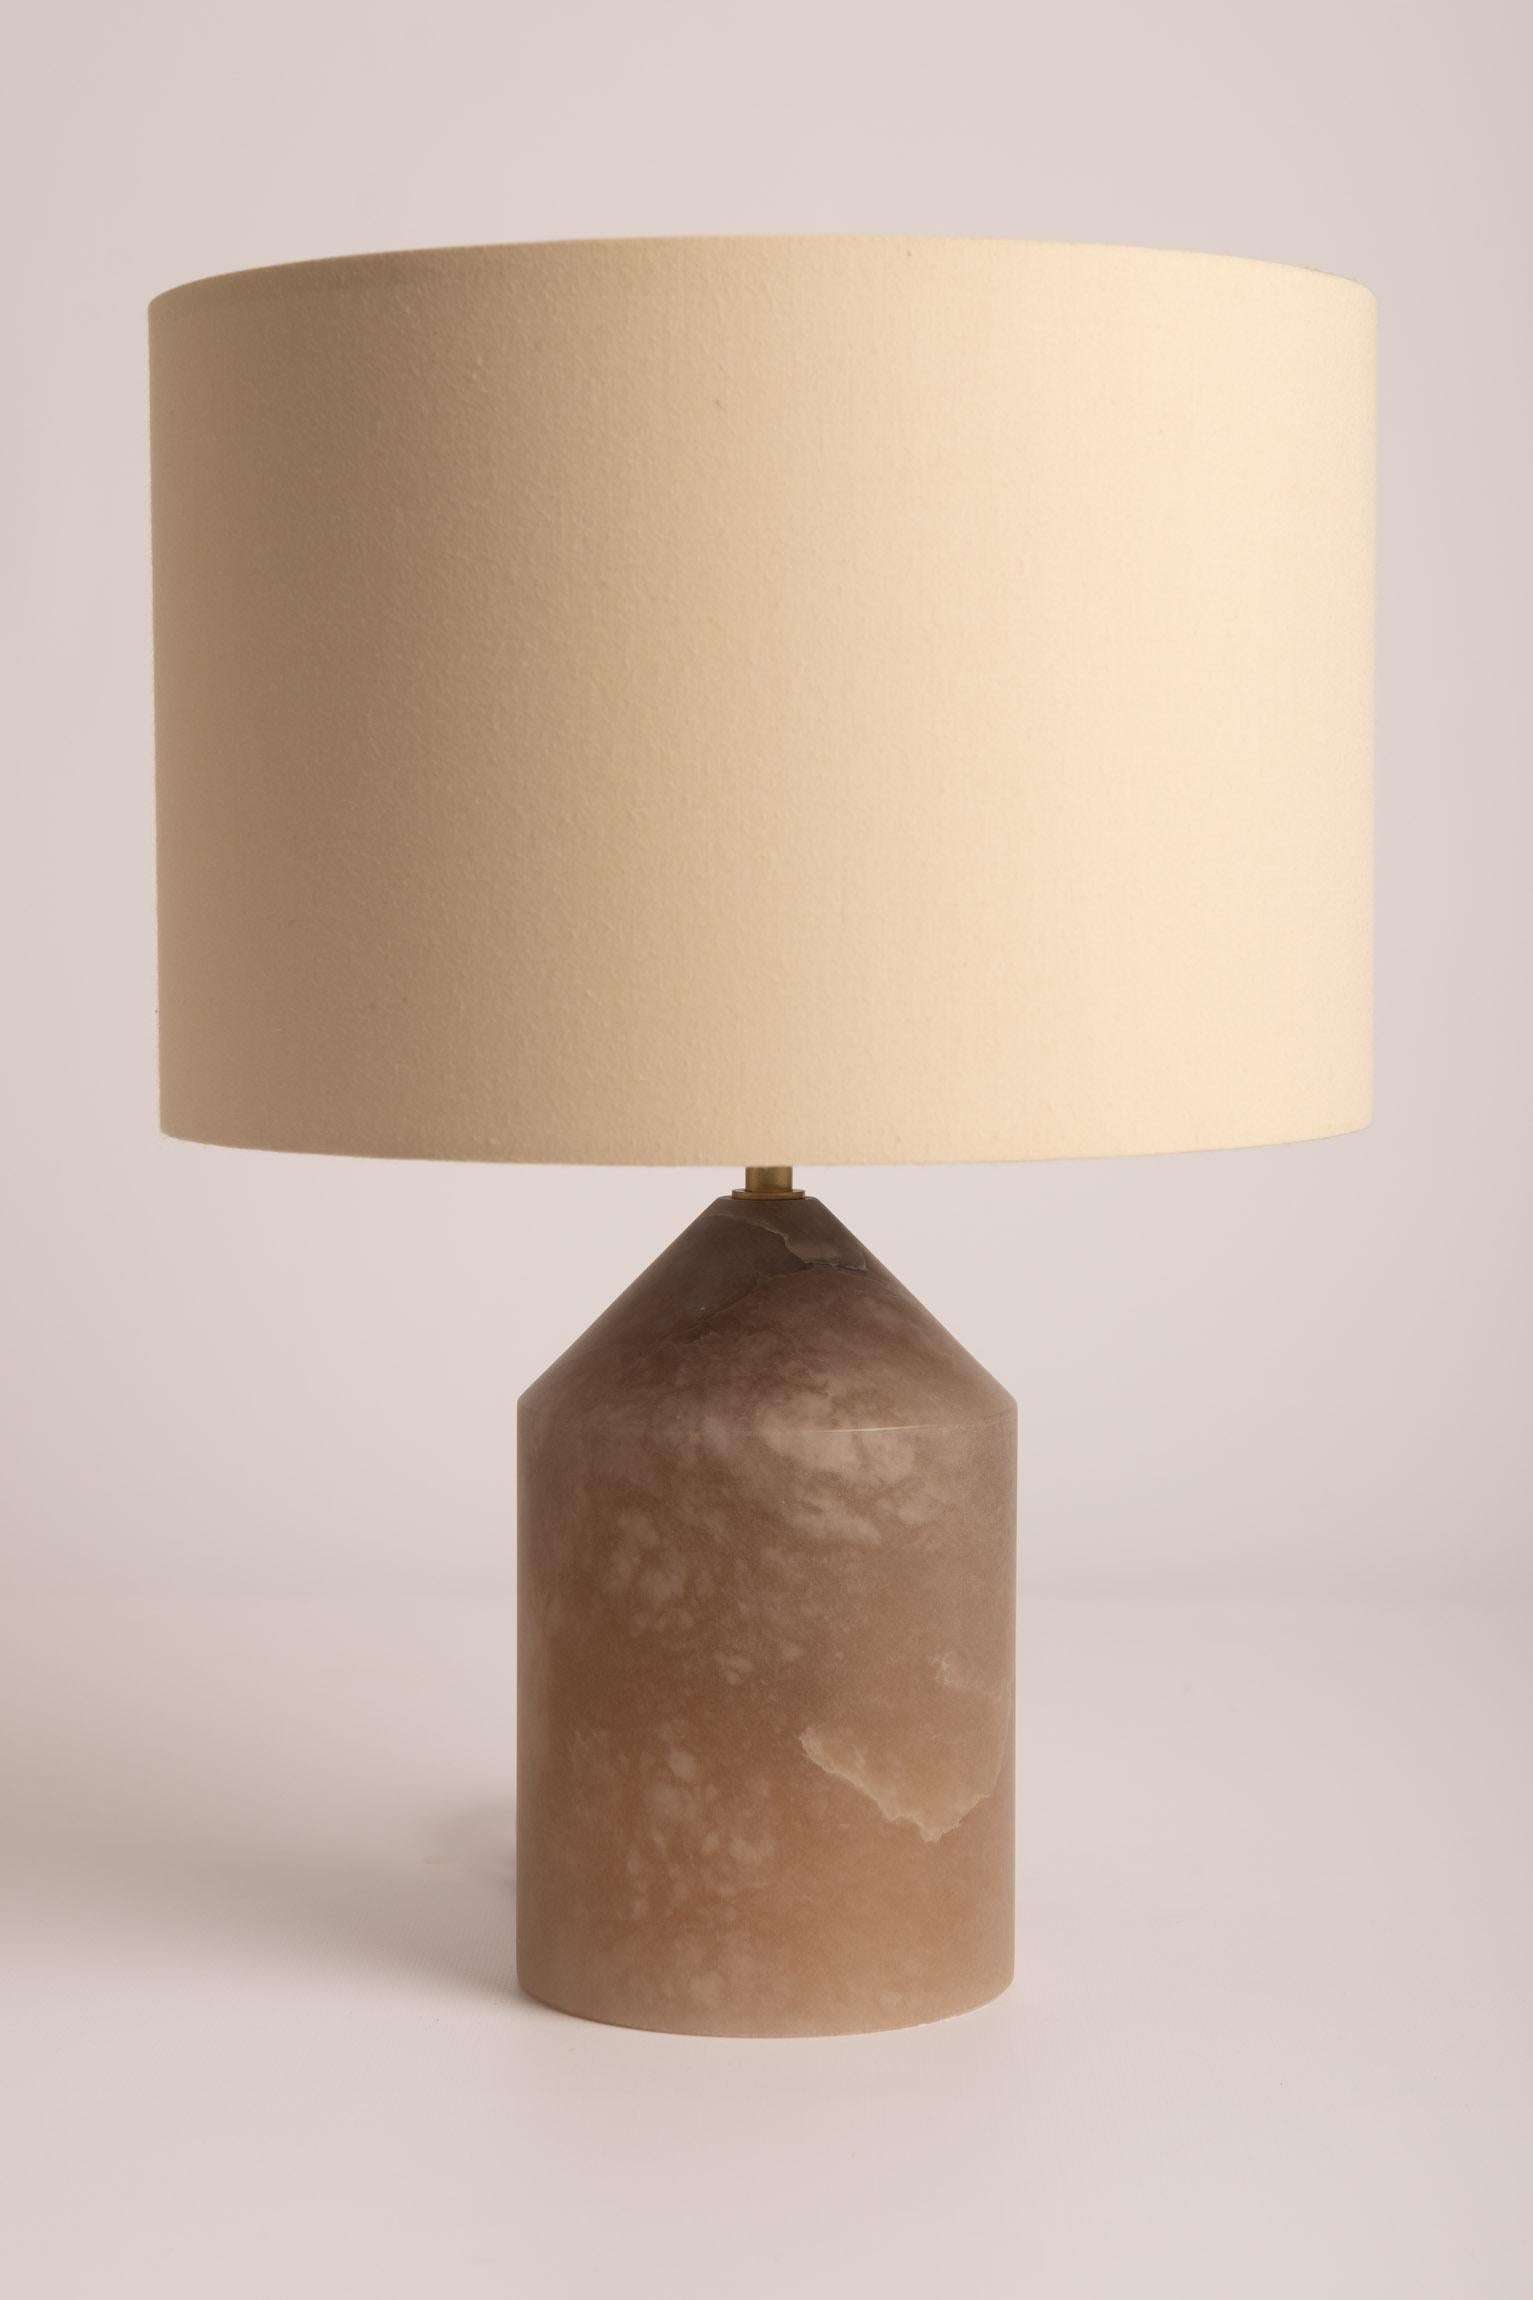 Tobacco Alabaster Josef Table Lamp by Simone & Marcel
Dimensions: Ø 30 x H 41.5 cm.
Materials: Brass, cotton and tobacco alabaster.

Also available in different marble, wood and alabaster options and finishes. Custom options available on request.